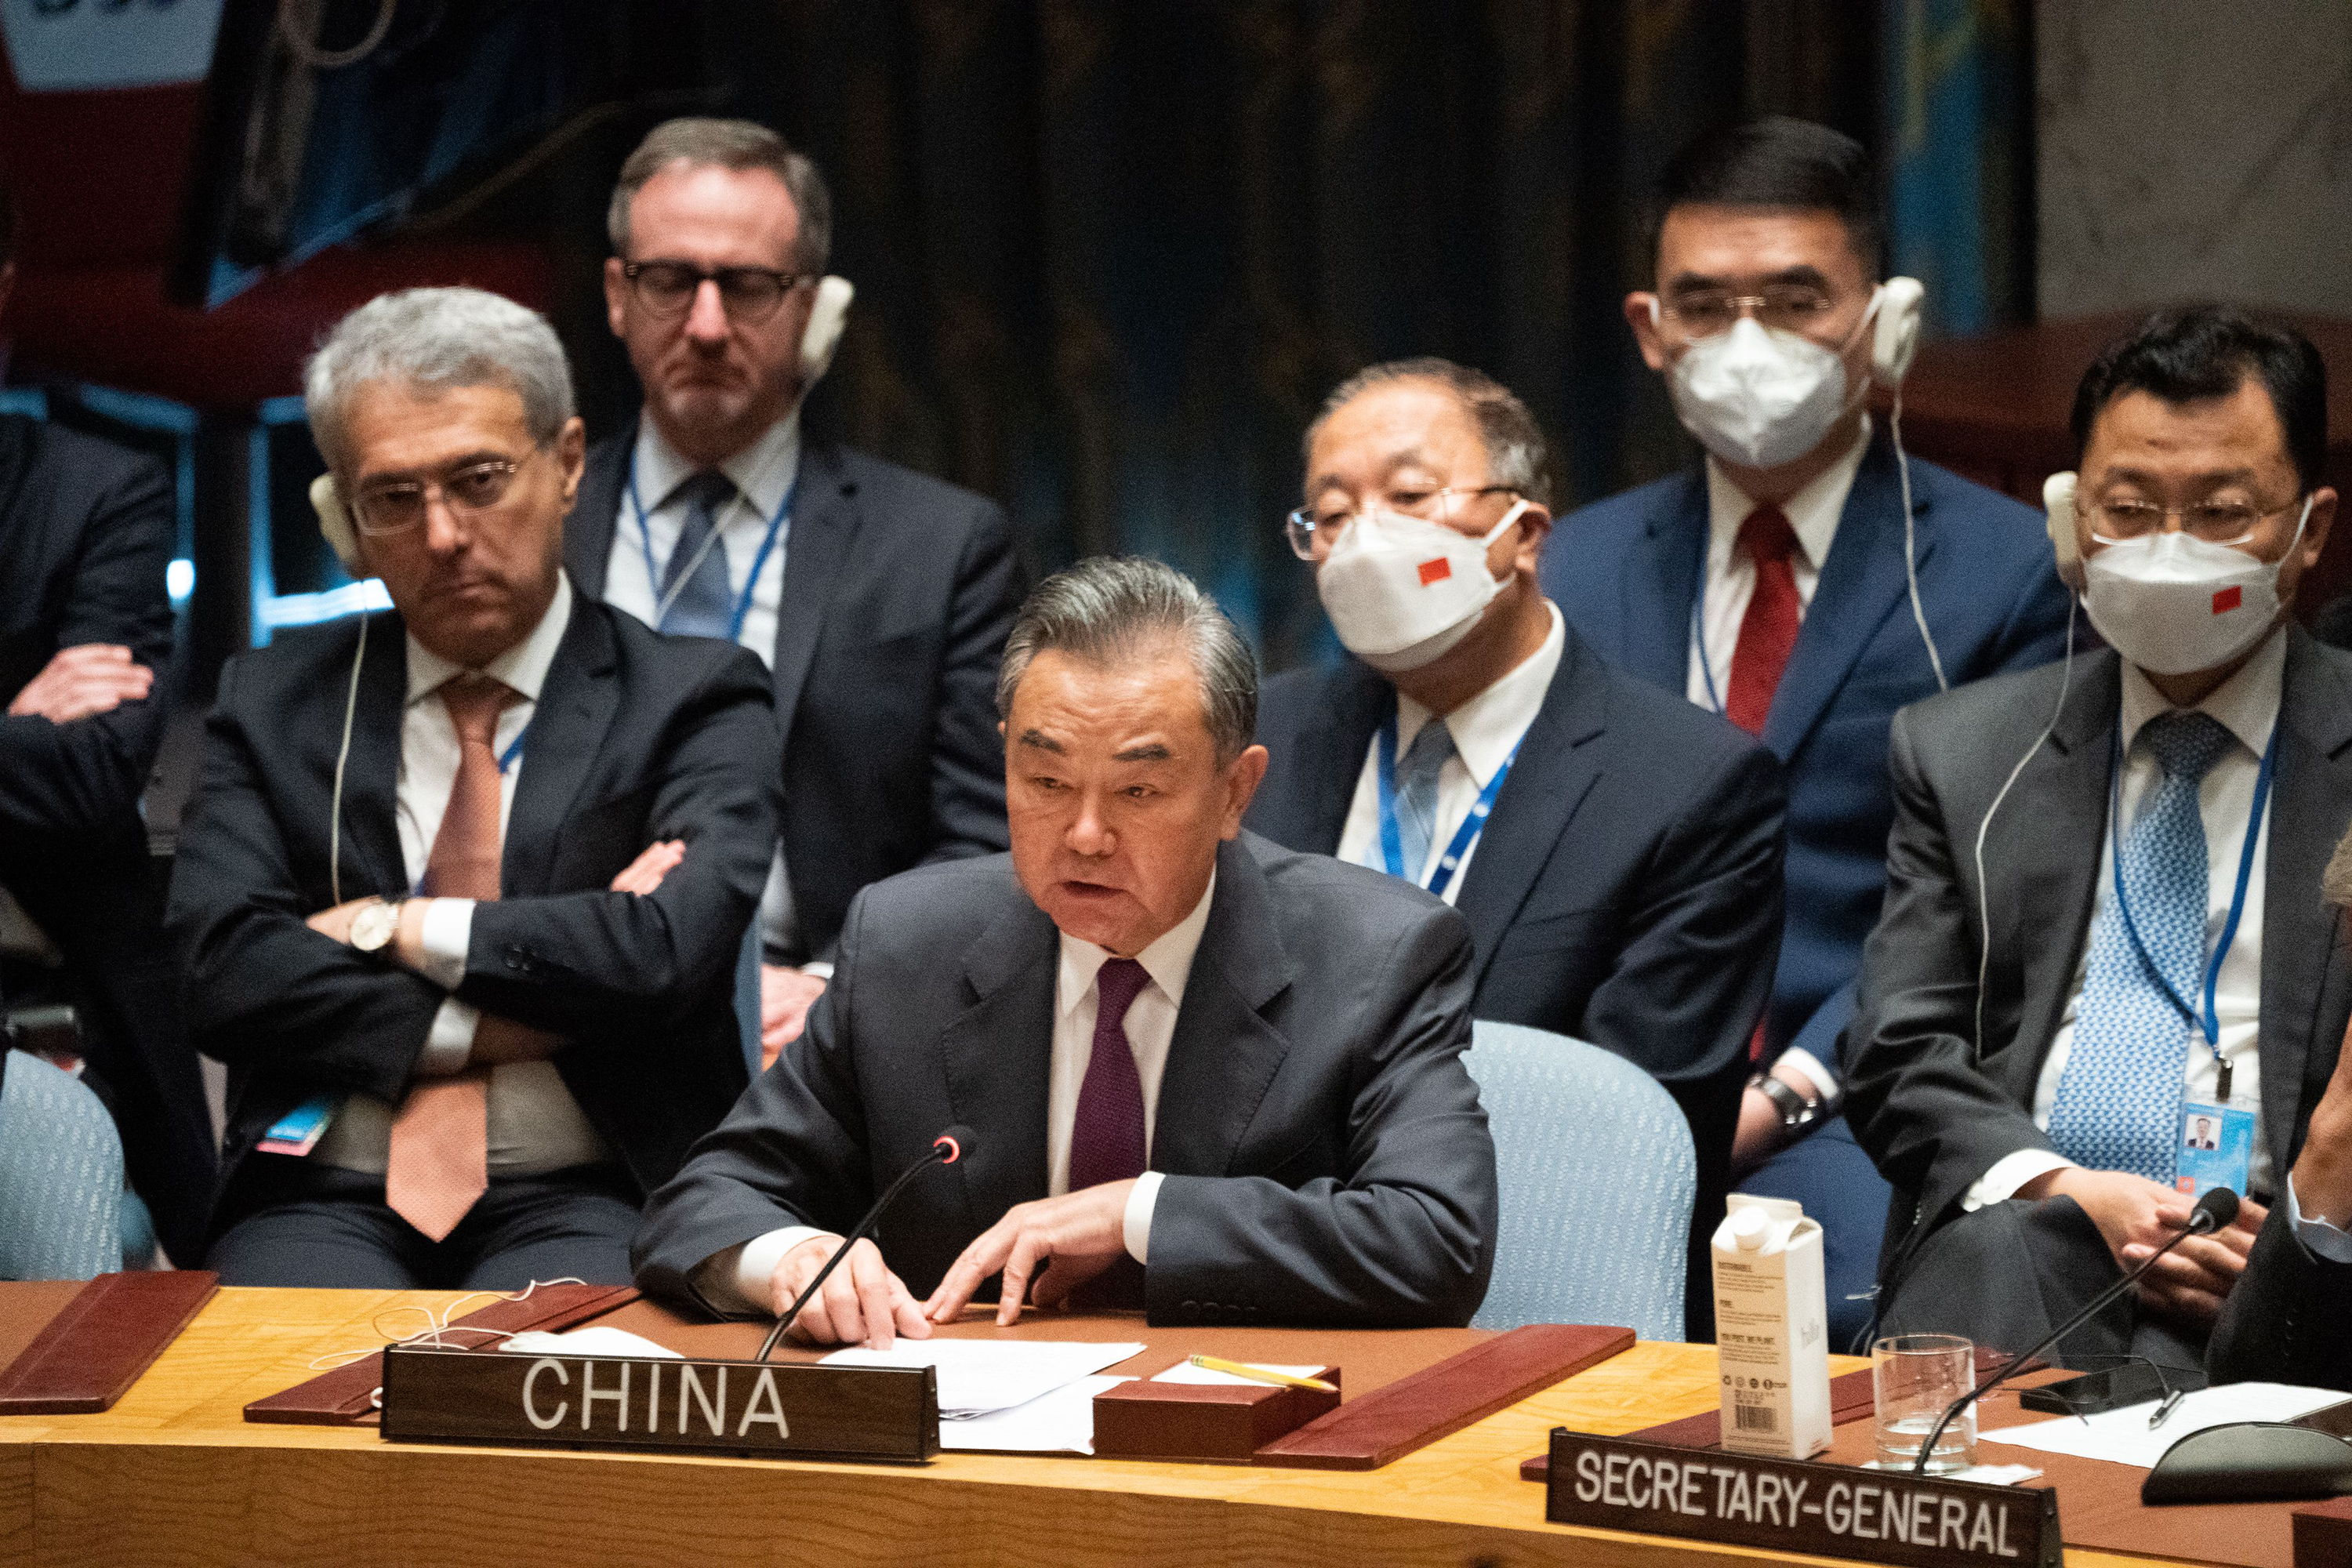 Chinese Foreign Minister Wang Yi speaks at the UN Security Council meeting on September 22.